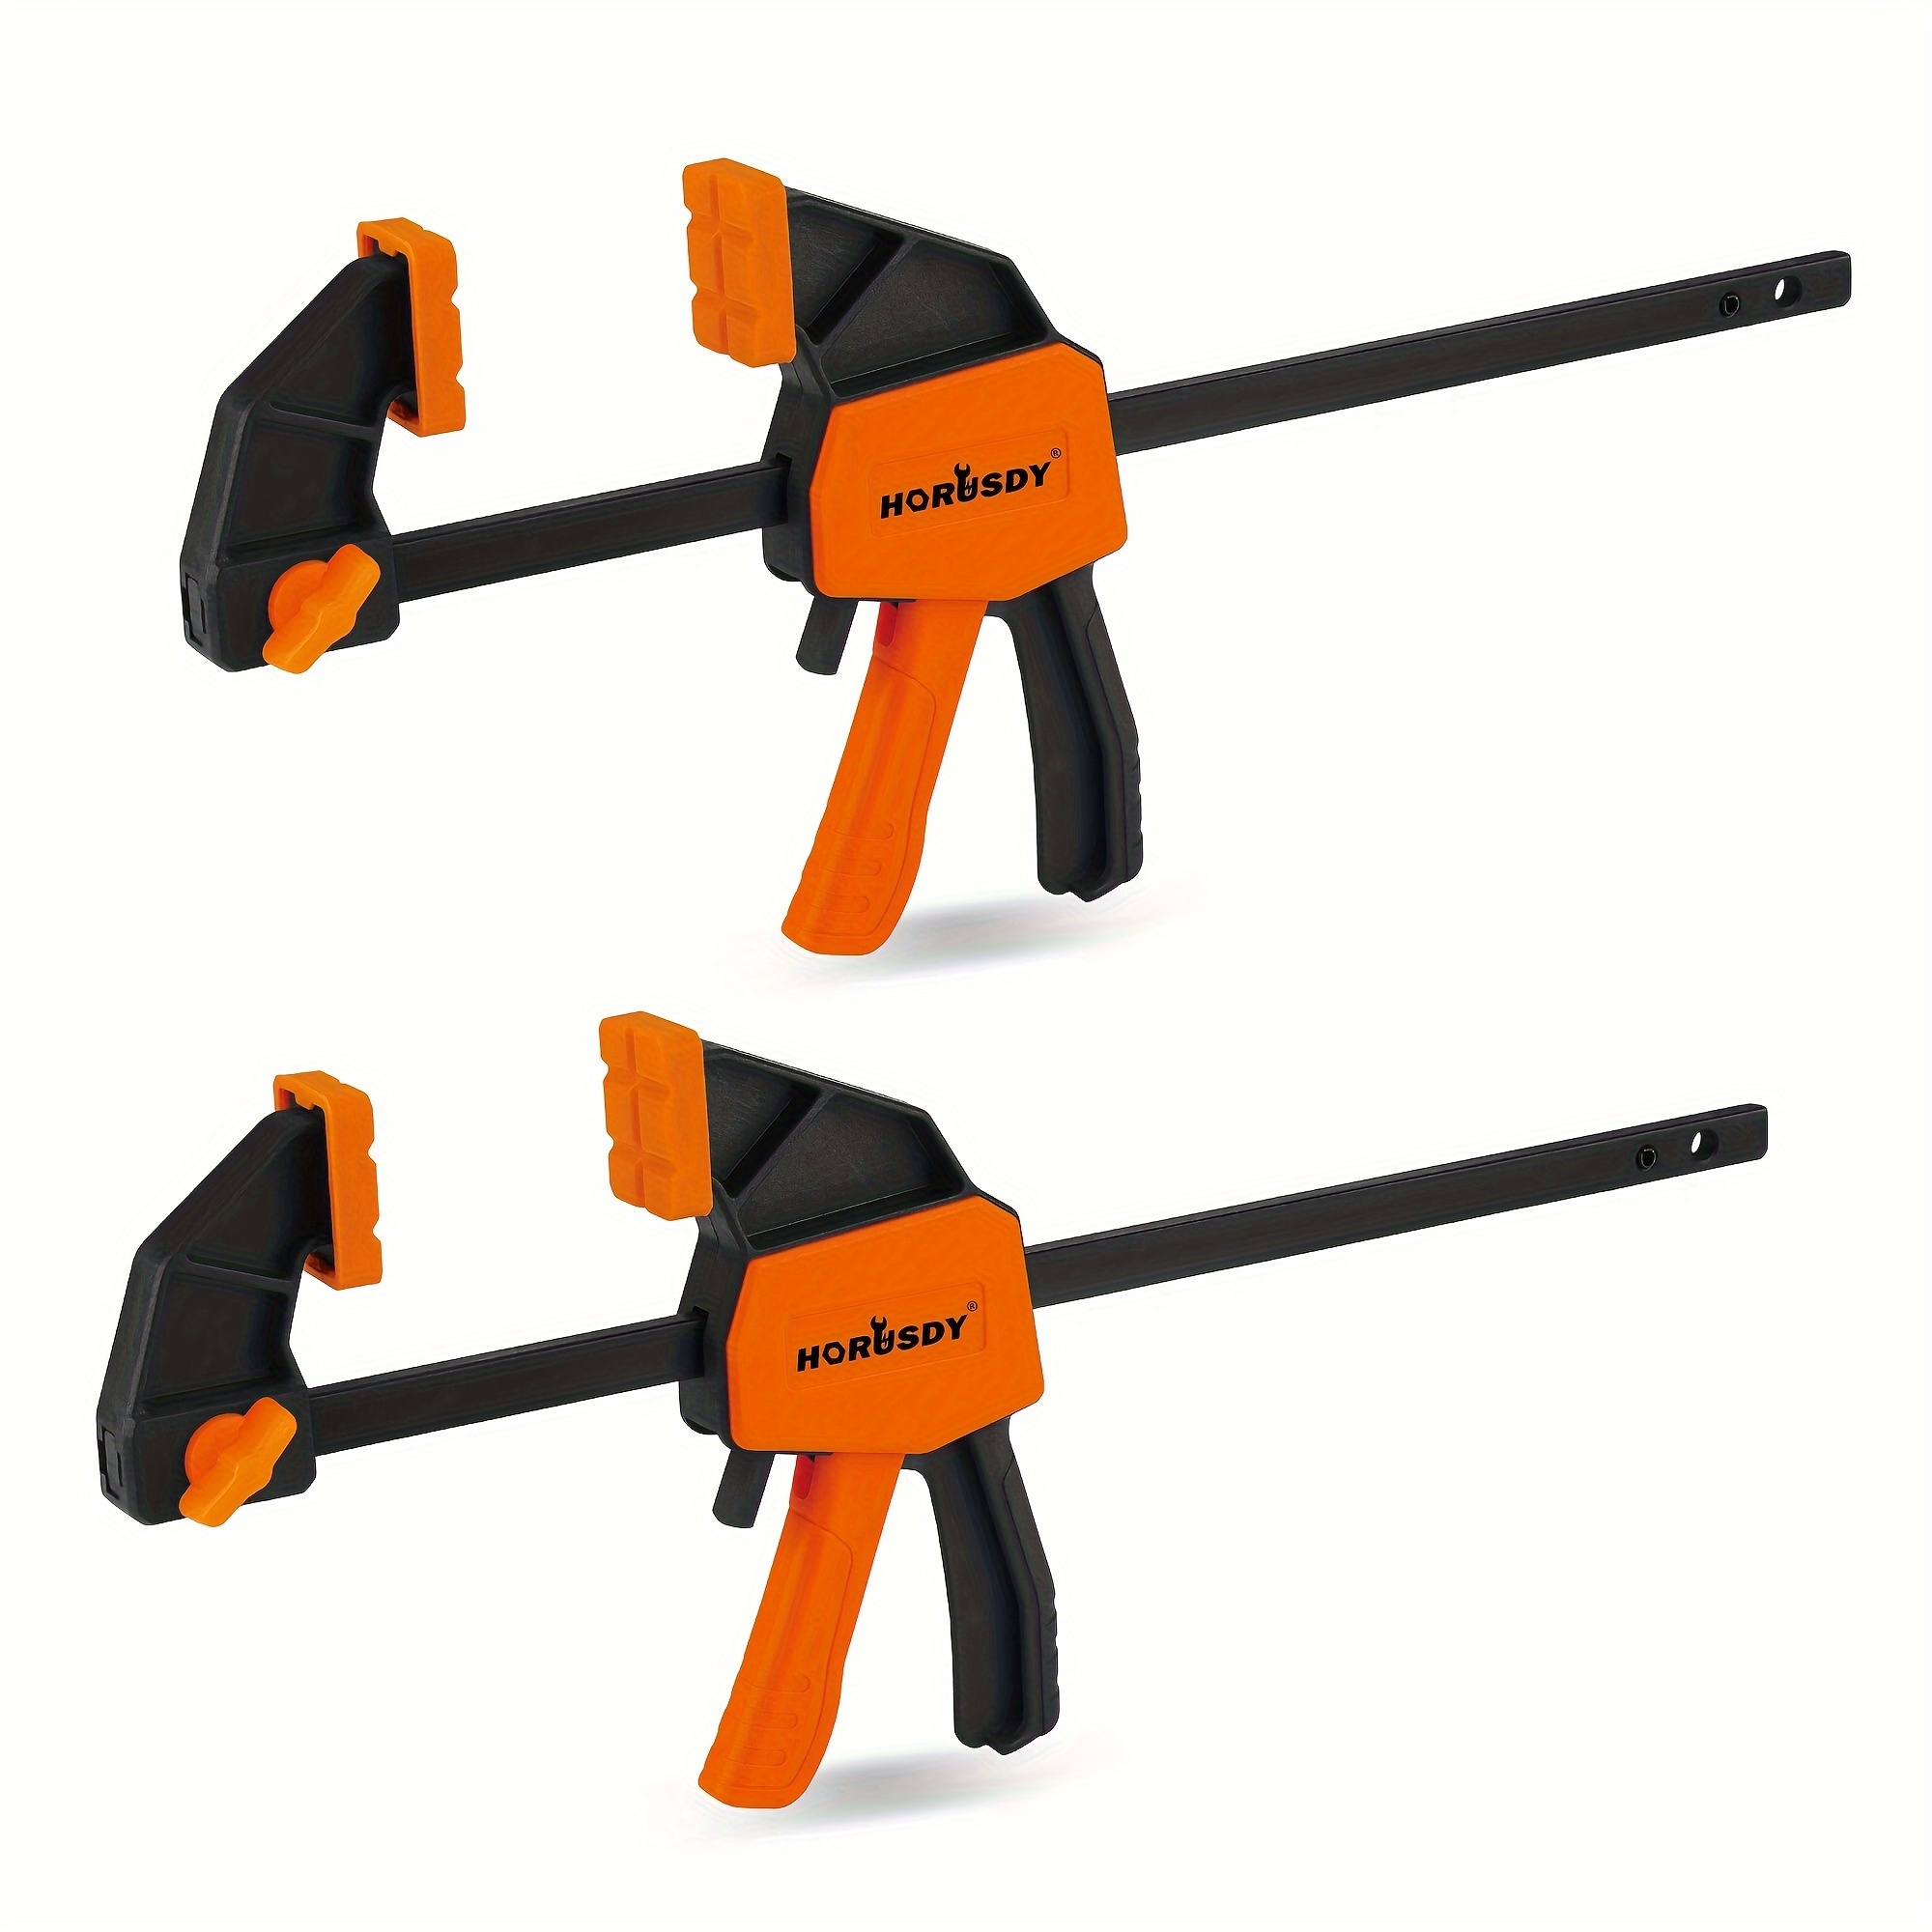 

Horsdy Steel Bar Clamps Set, 2-piece, 6-inch, Quick-grip F Clamp Woodworking Tools, Uncharged, Without Battery - Black & Orange